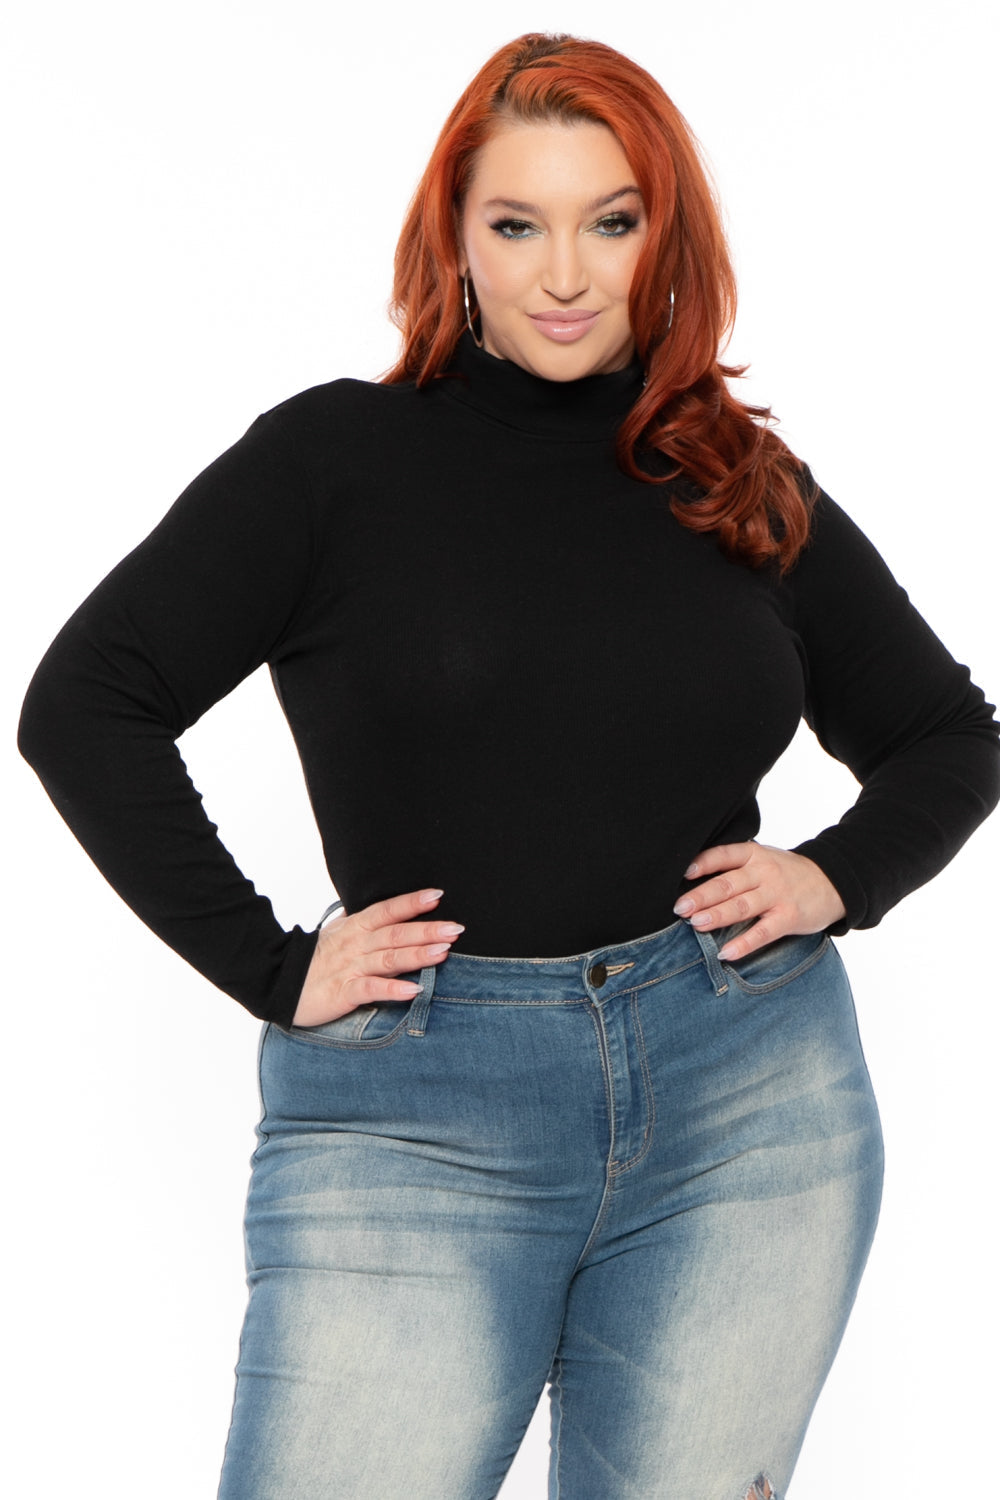 Ambiance Tops 1X / Black Plus Size Ribbed Turtleneck Top - Black